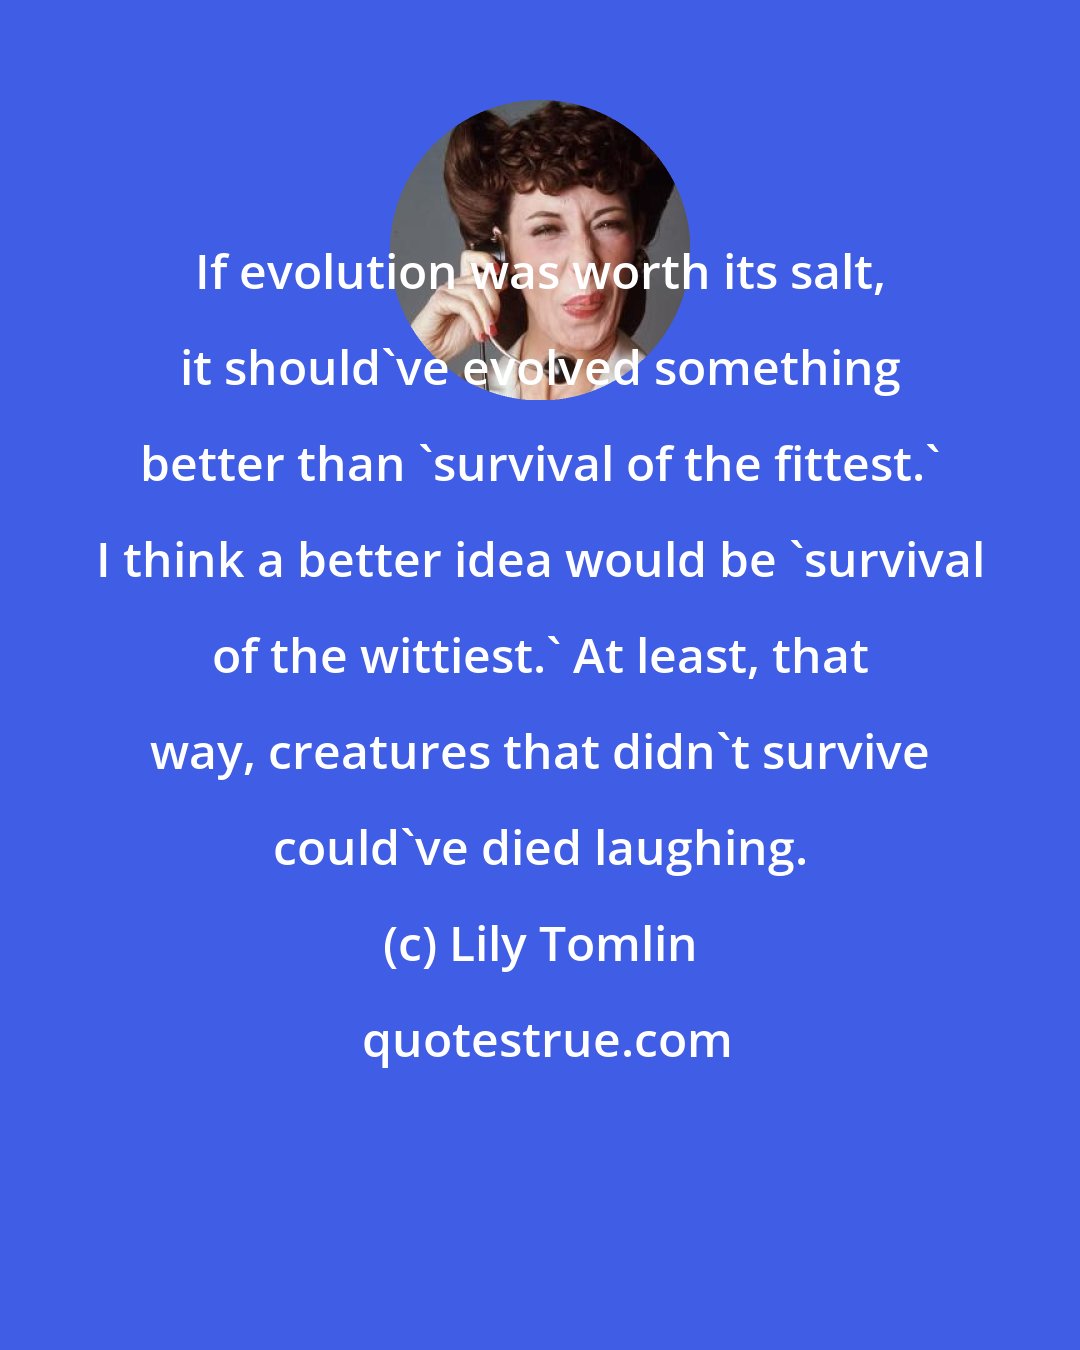 Lily Tomlin: If evolution was worth its salt, it should've evolved something better than 'survival of the fittest.' I think a better idea would be 'survival of the wittiest.' At least, that way, creatures that didn't survive could've died laughing.